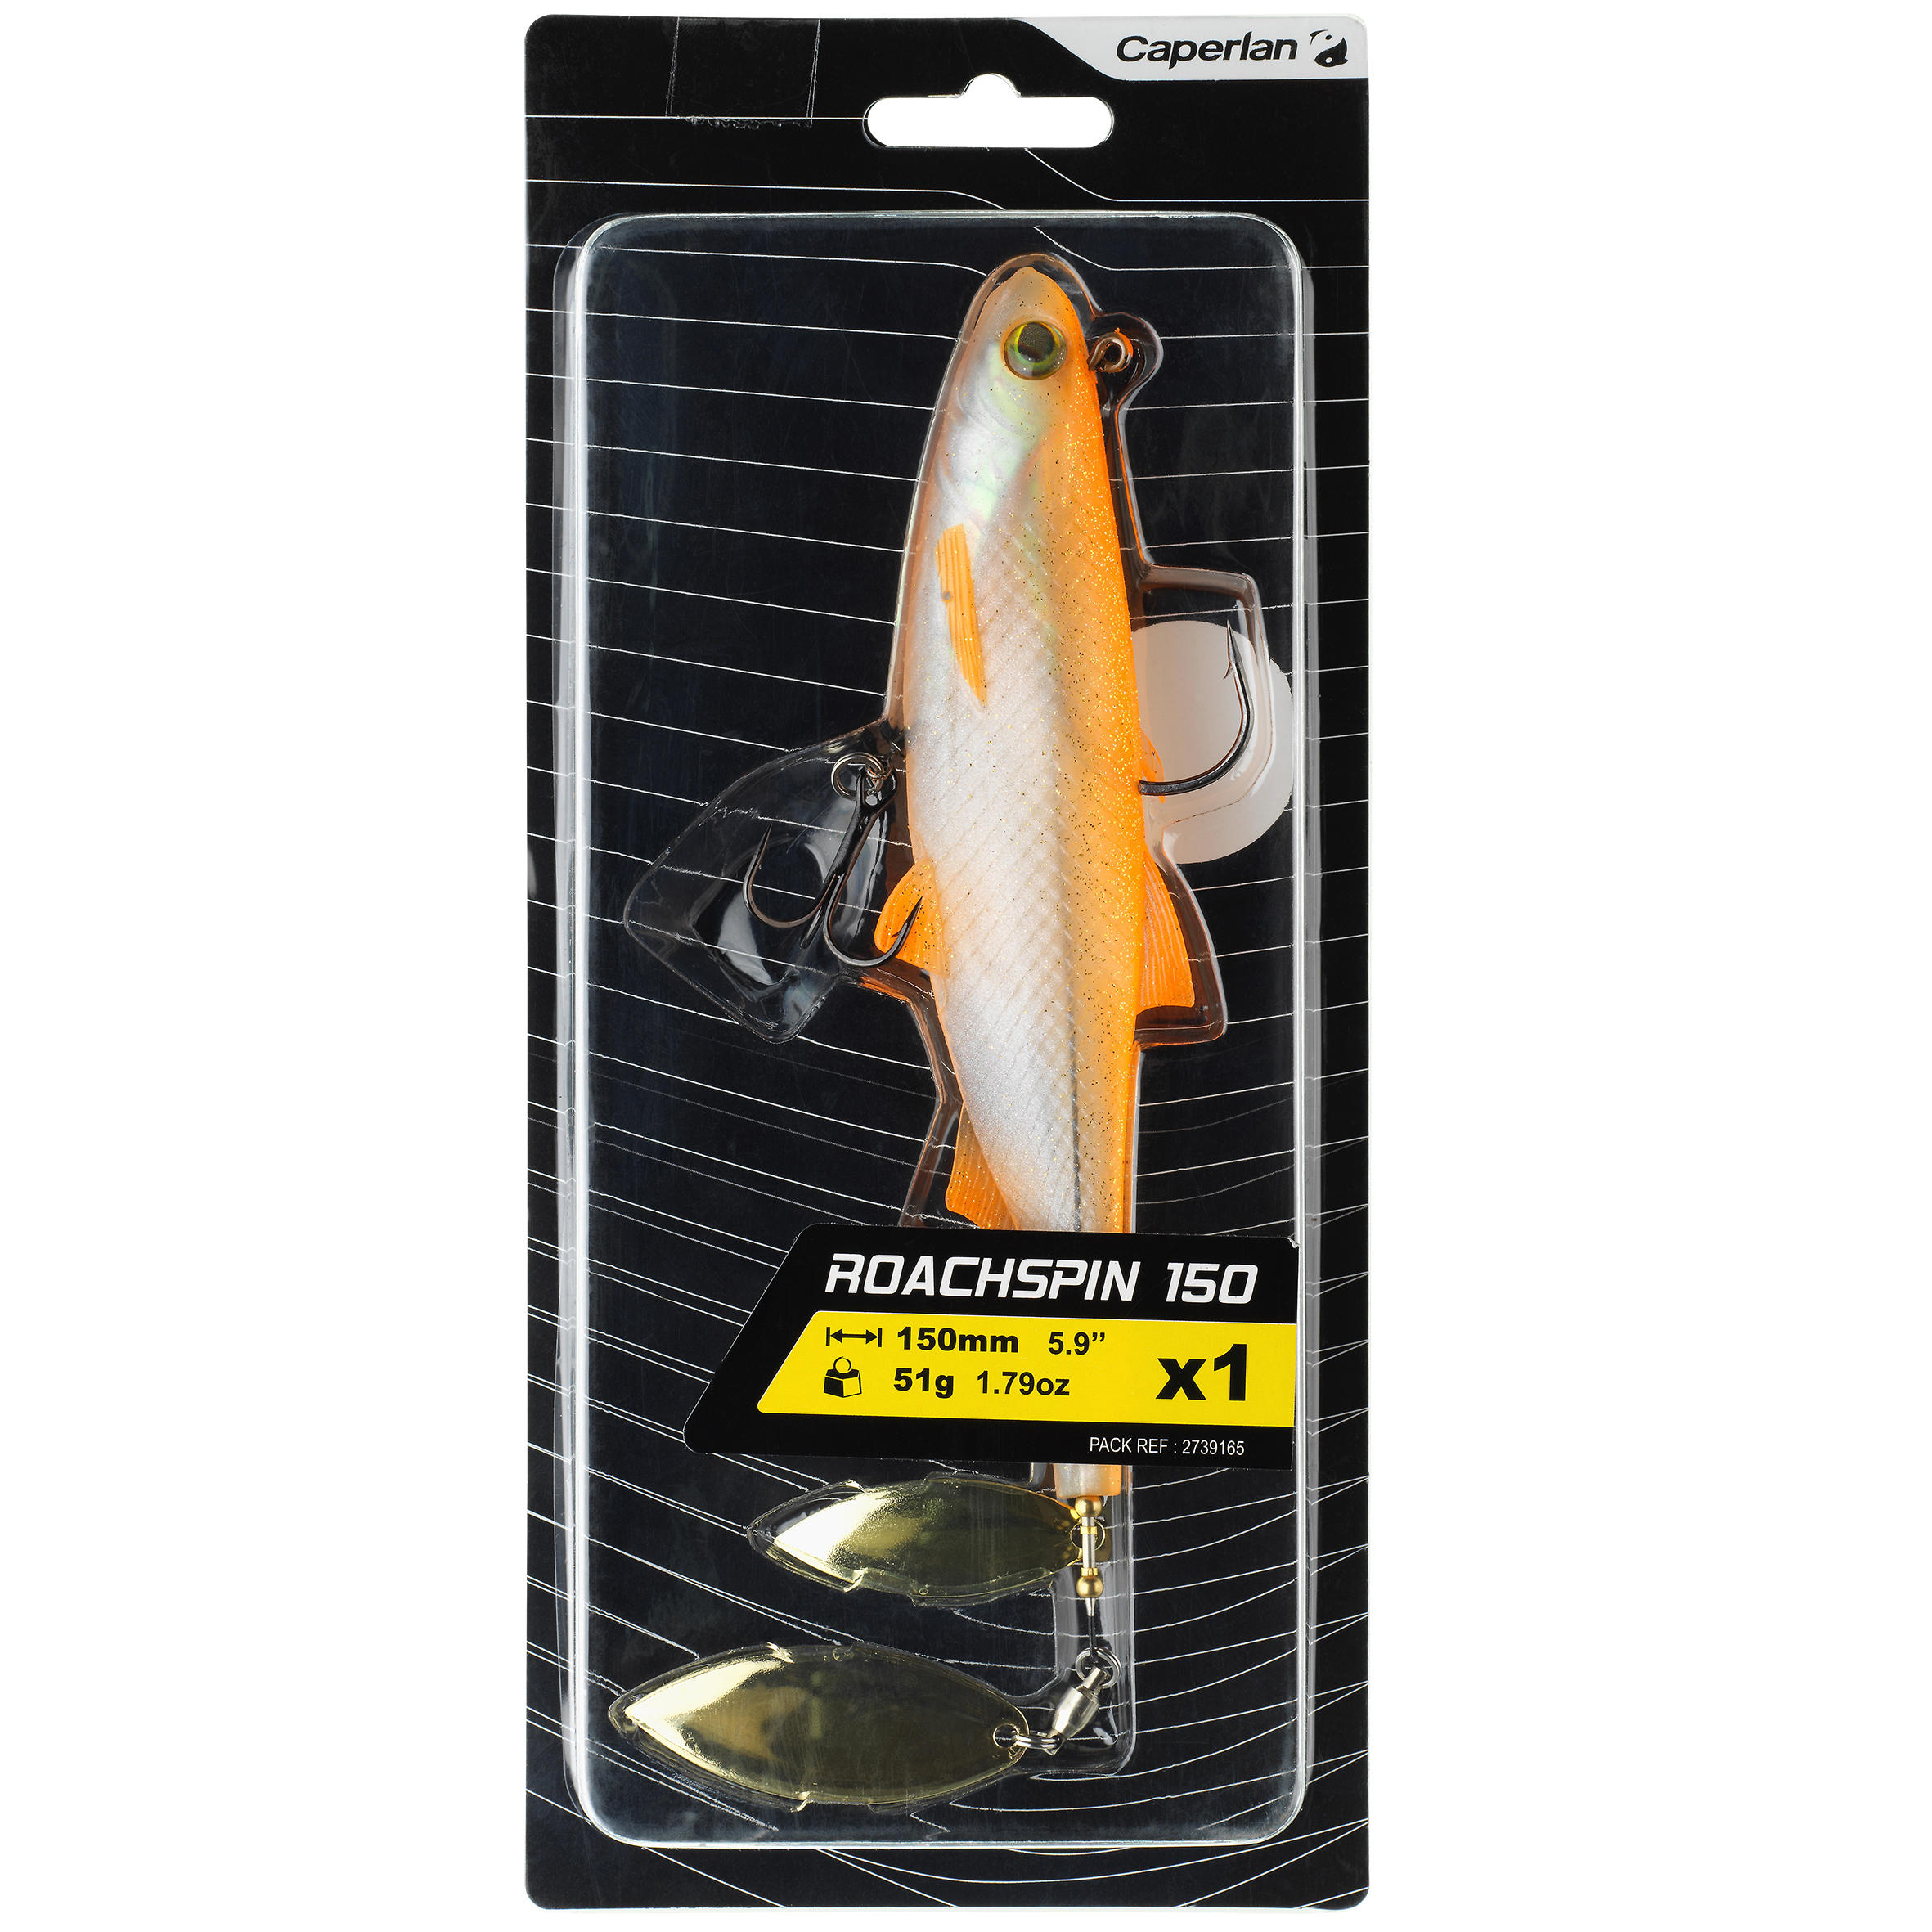 LURE FISHING ROACHSPIN 150 ORANGE BLADED SHAD SOFT LURE 2/3